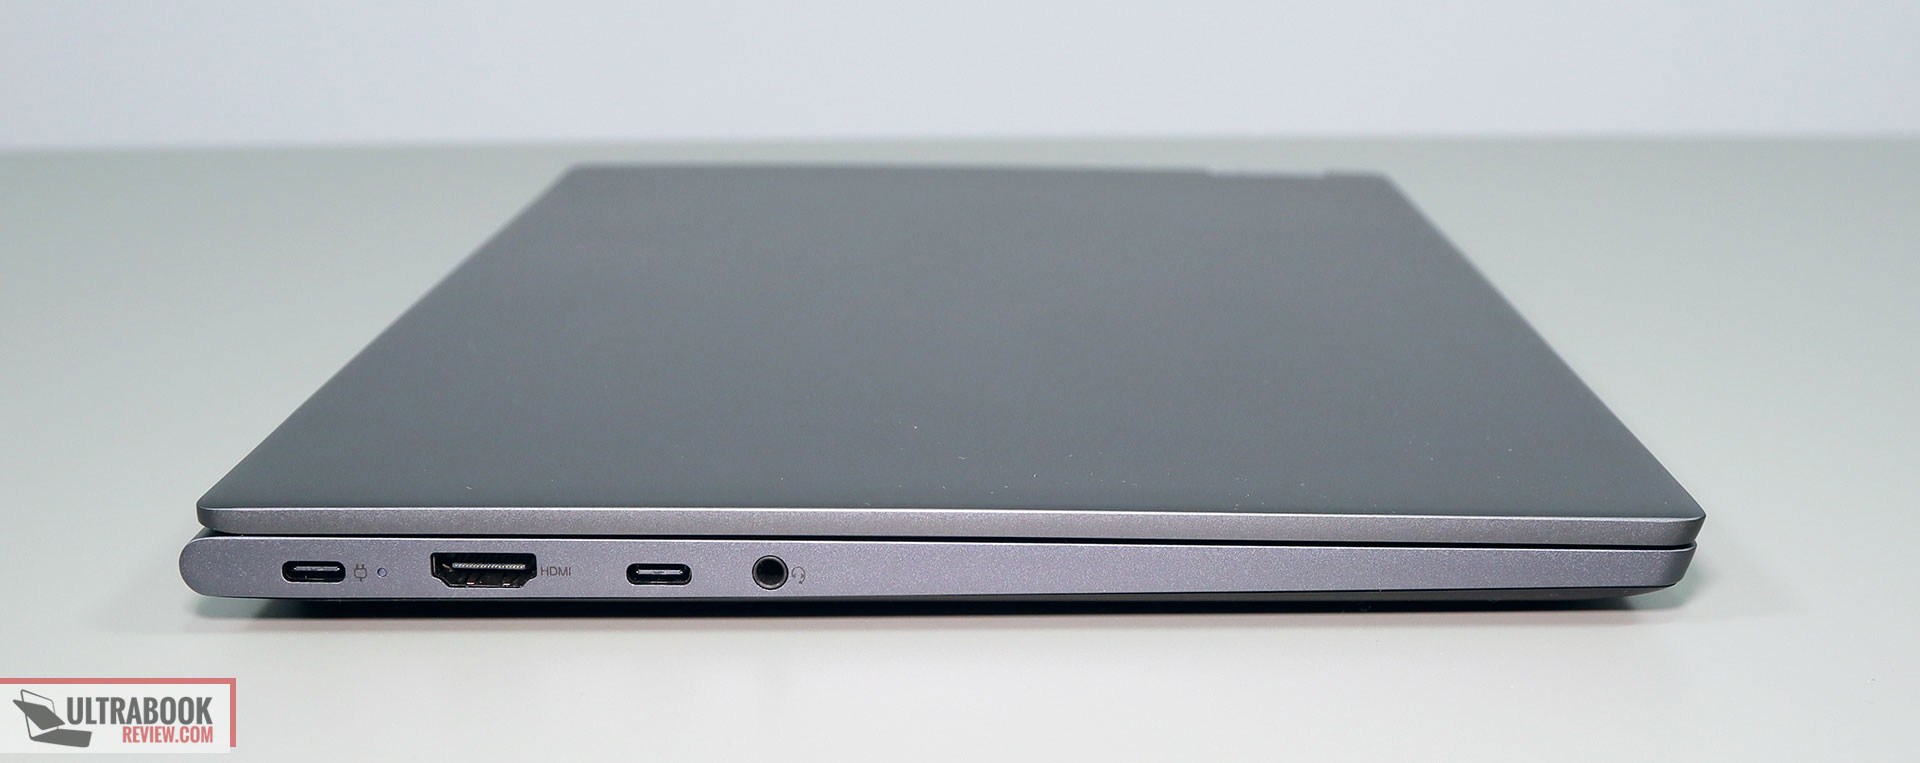 Lenovo IdeaPad/Yoga Slim 7 14ARE05 review - unmatched in its class